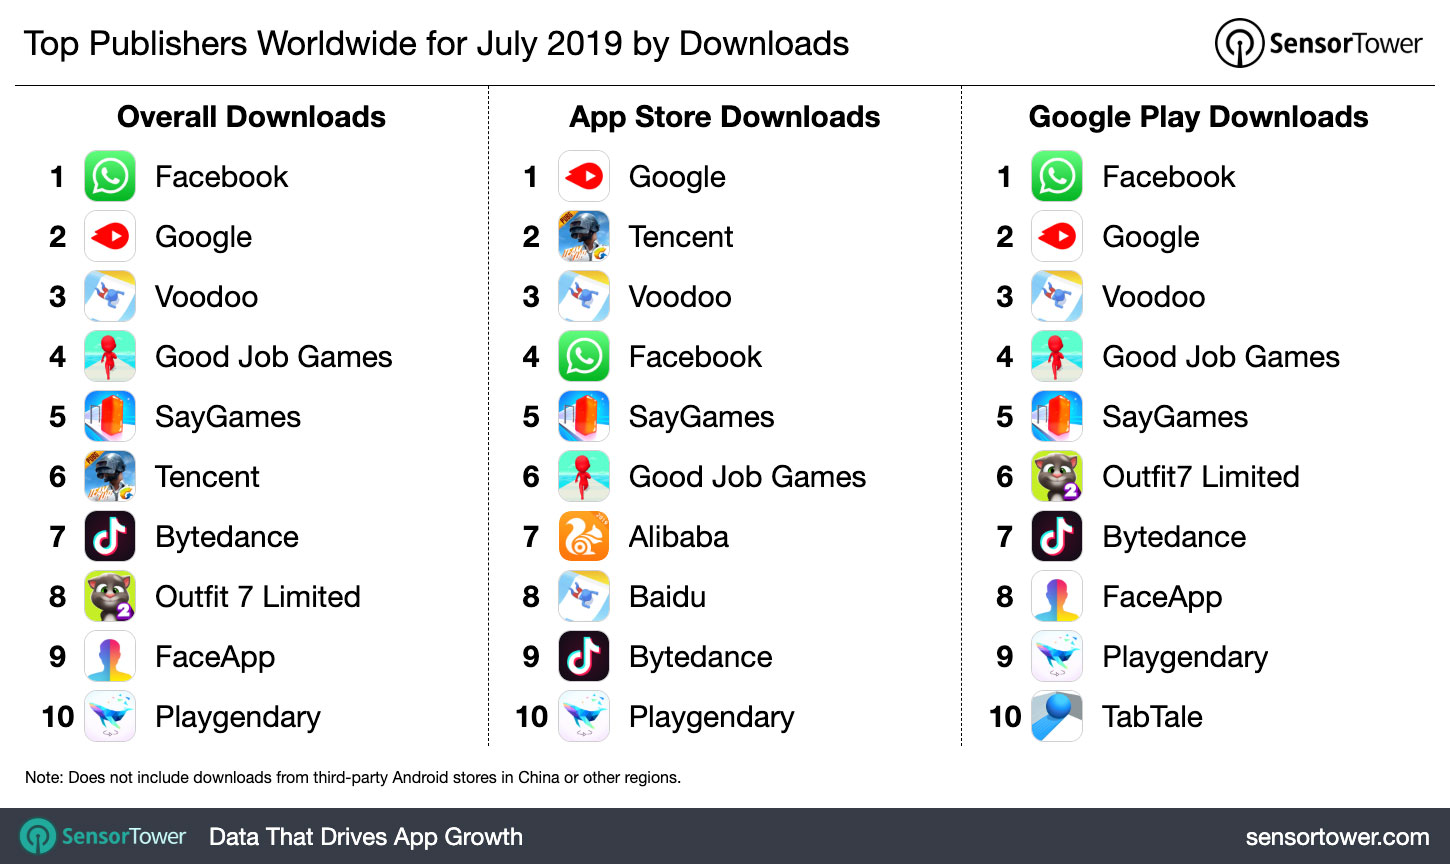 Top Publishers Worldwide for July 2019 by Downloads